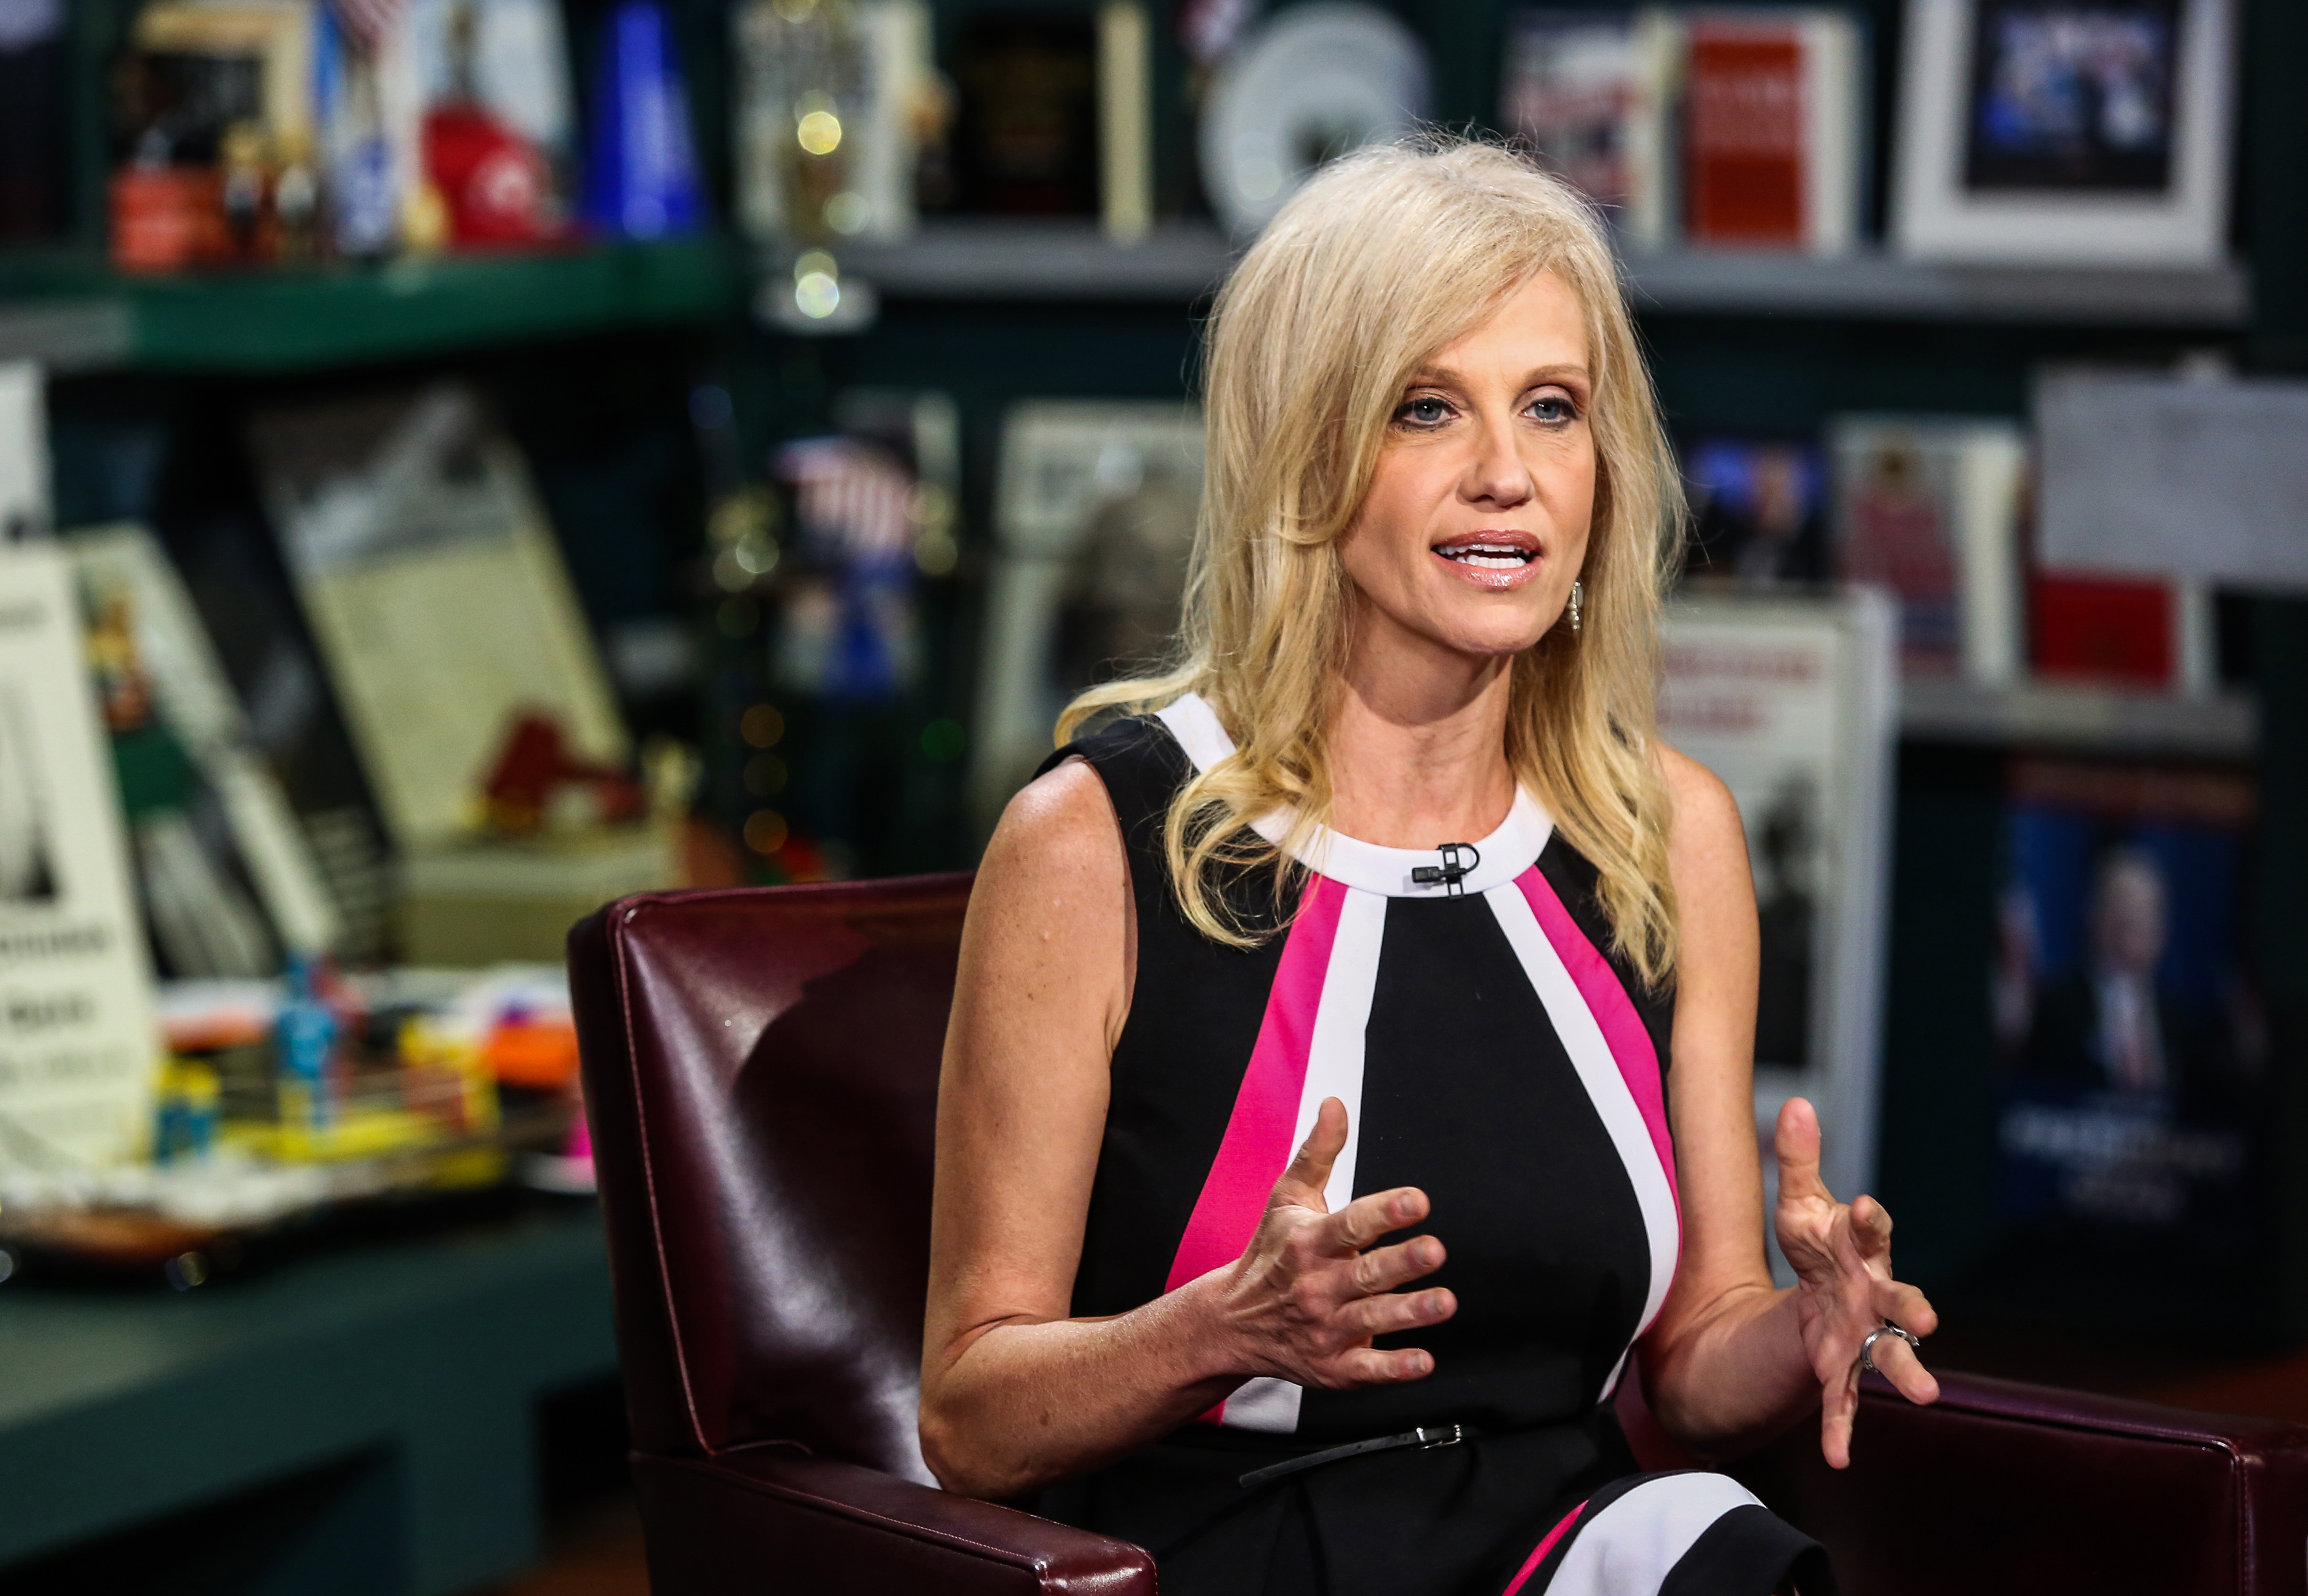 Polling Co. Inc./Woman Trend President And Chief Executive Officer Kellyanne Conway Interview